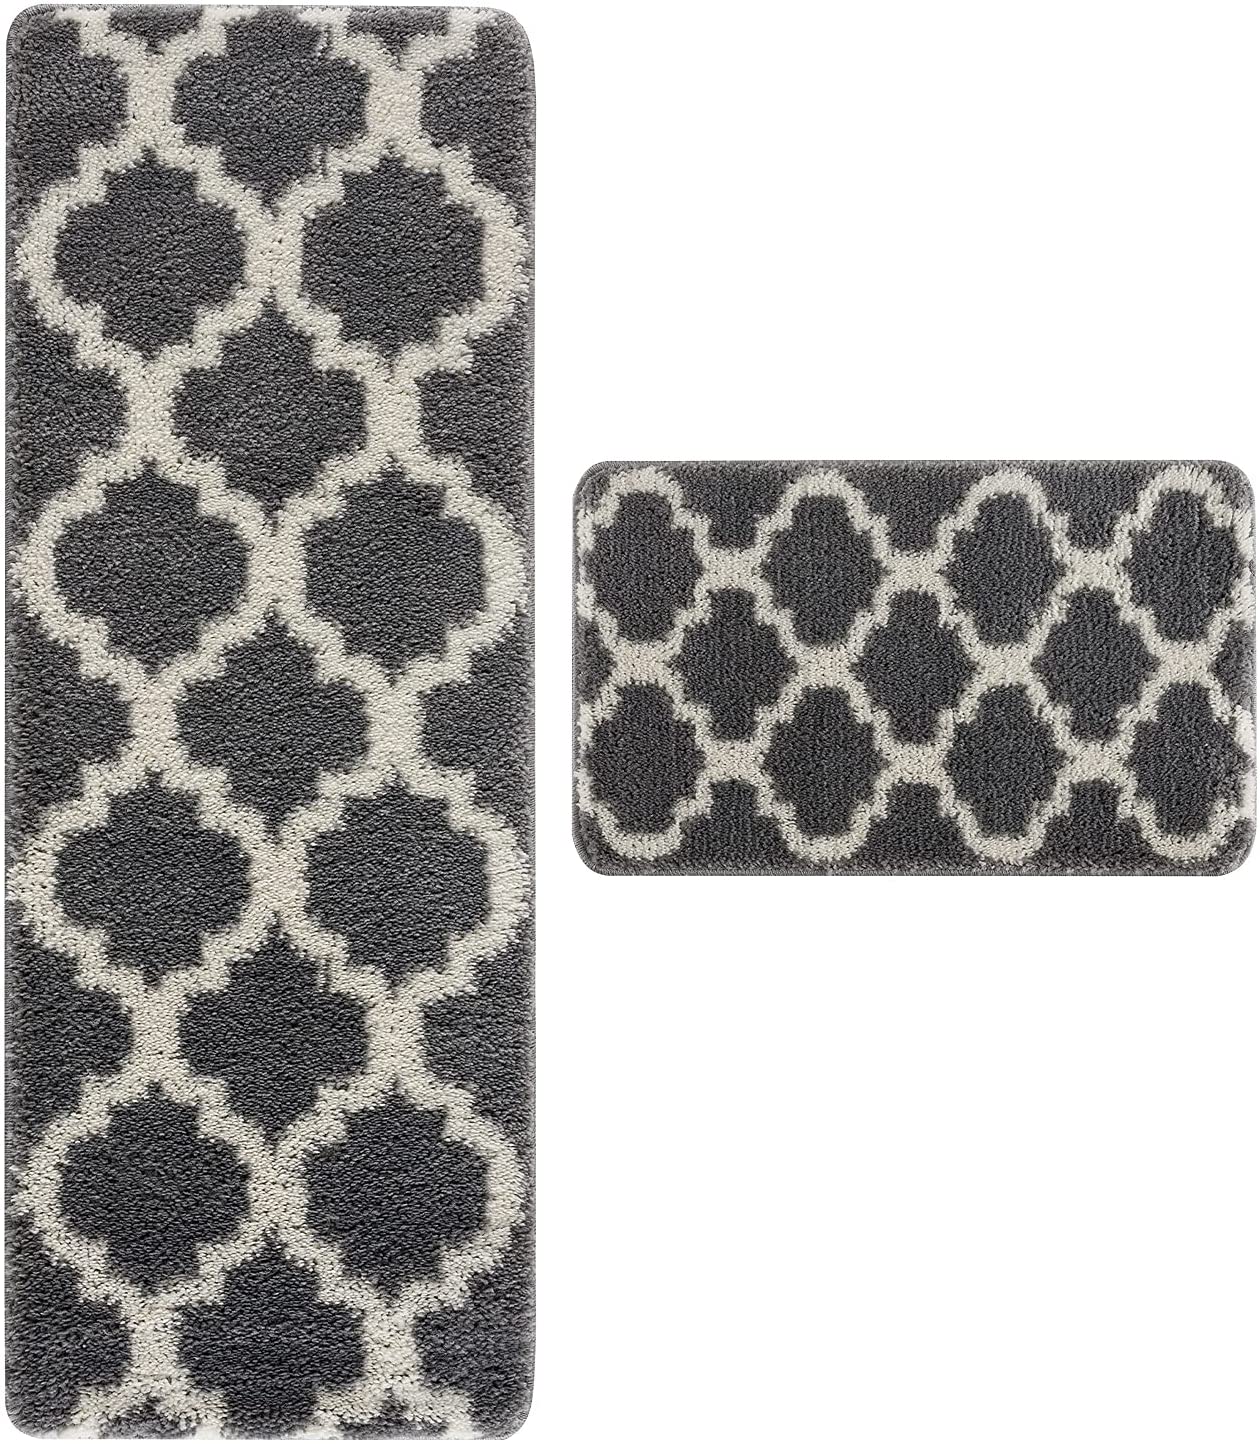 wunderlin Soft Trellis Kitchen Runner Rugs Collection Non-Slip Kitchen Washable Rugs Sets of Two